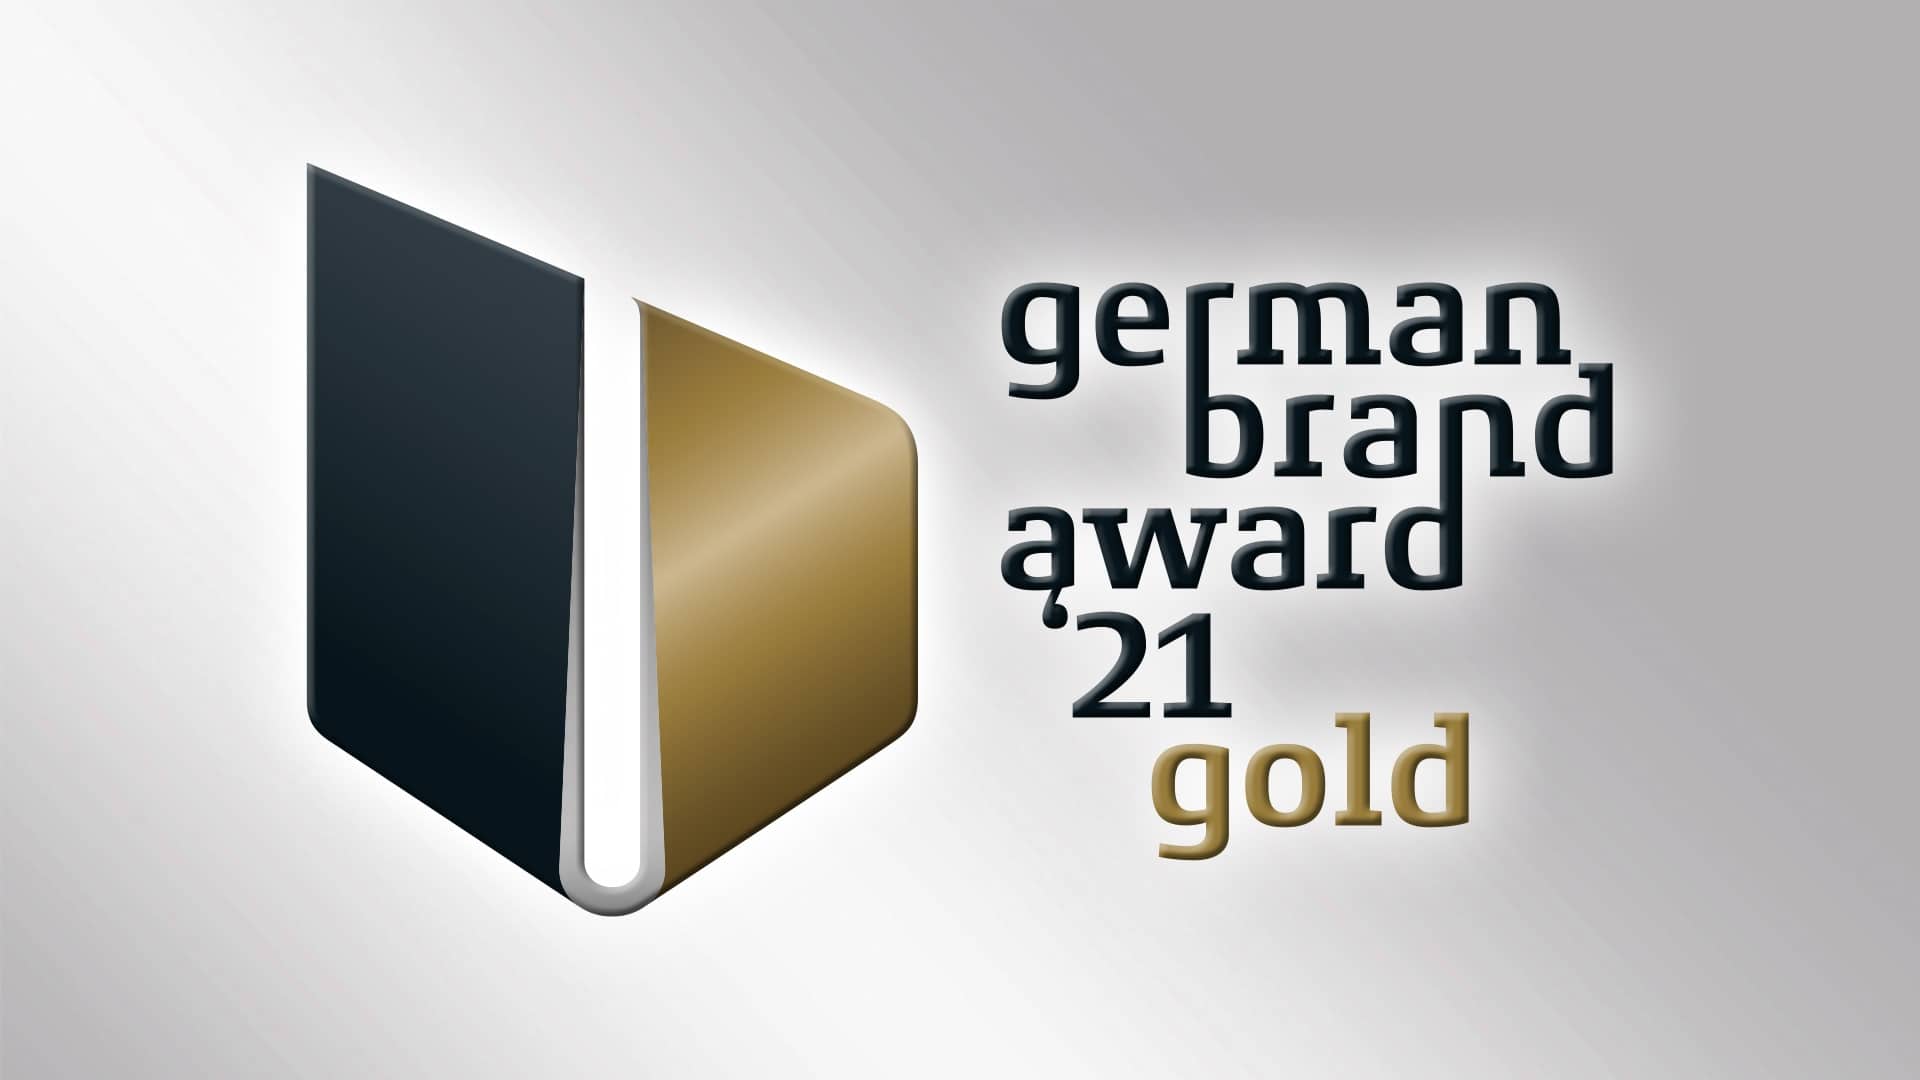 Knorr-Bremse was presented with the coveted “Gold” German Brand Award in the “Excellent Brands – Transport & Mobility” category